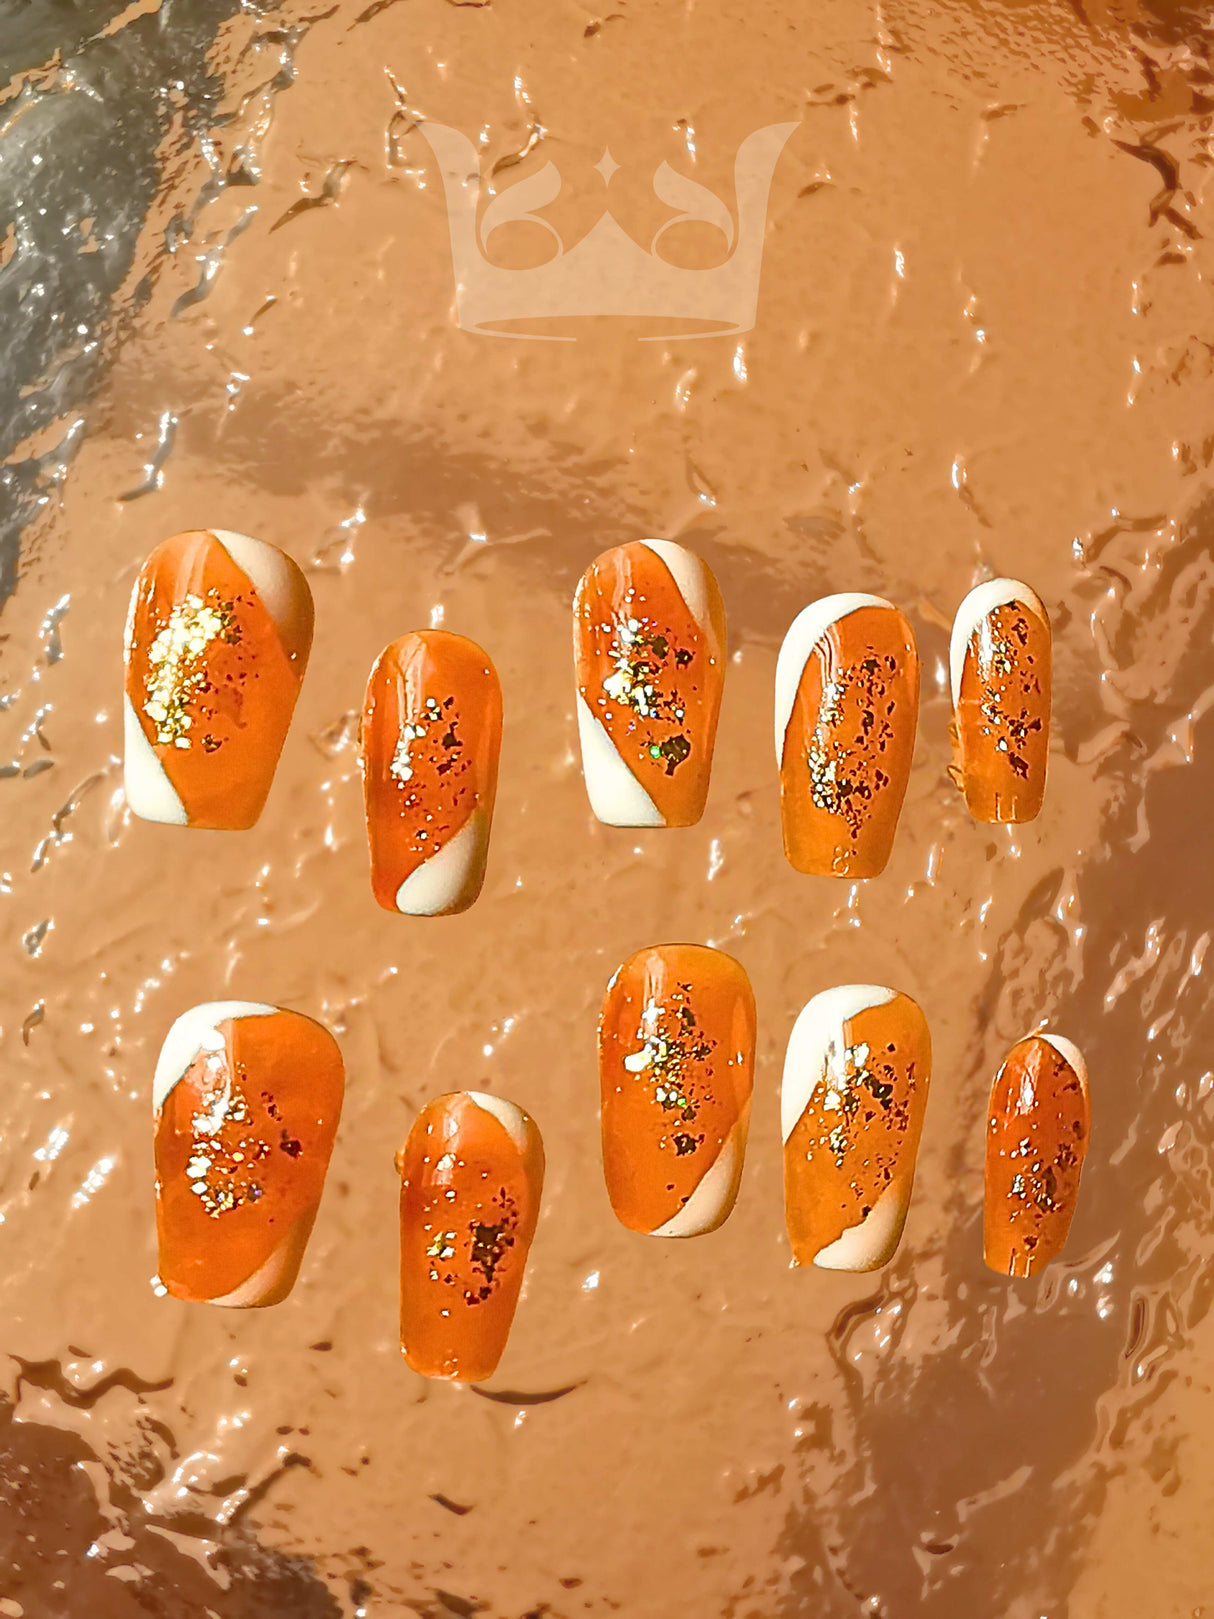 Sparkly and festive nails with gold glitter, star-shaped embellishments, and orange base color are perfect for adding glamour to a special occasion outfit.